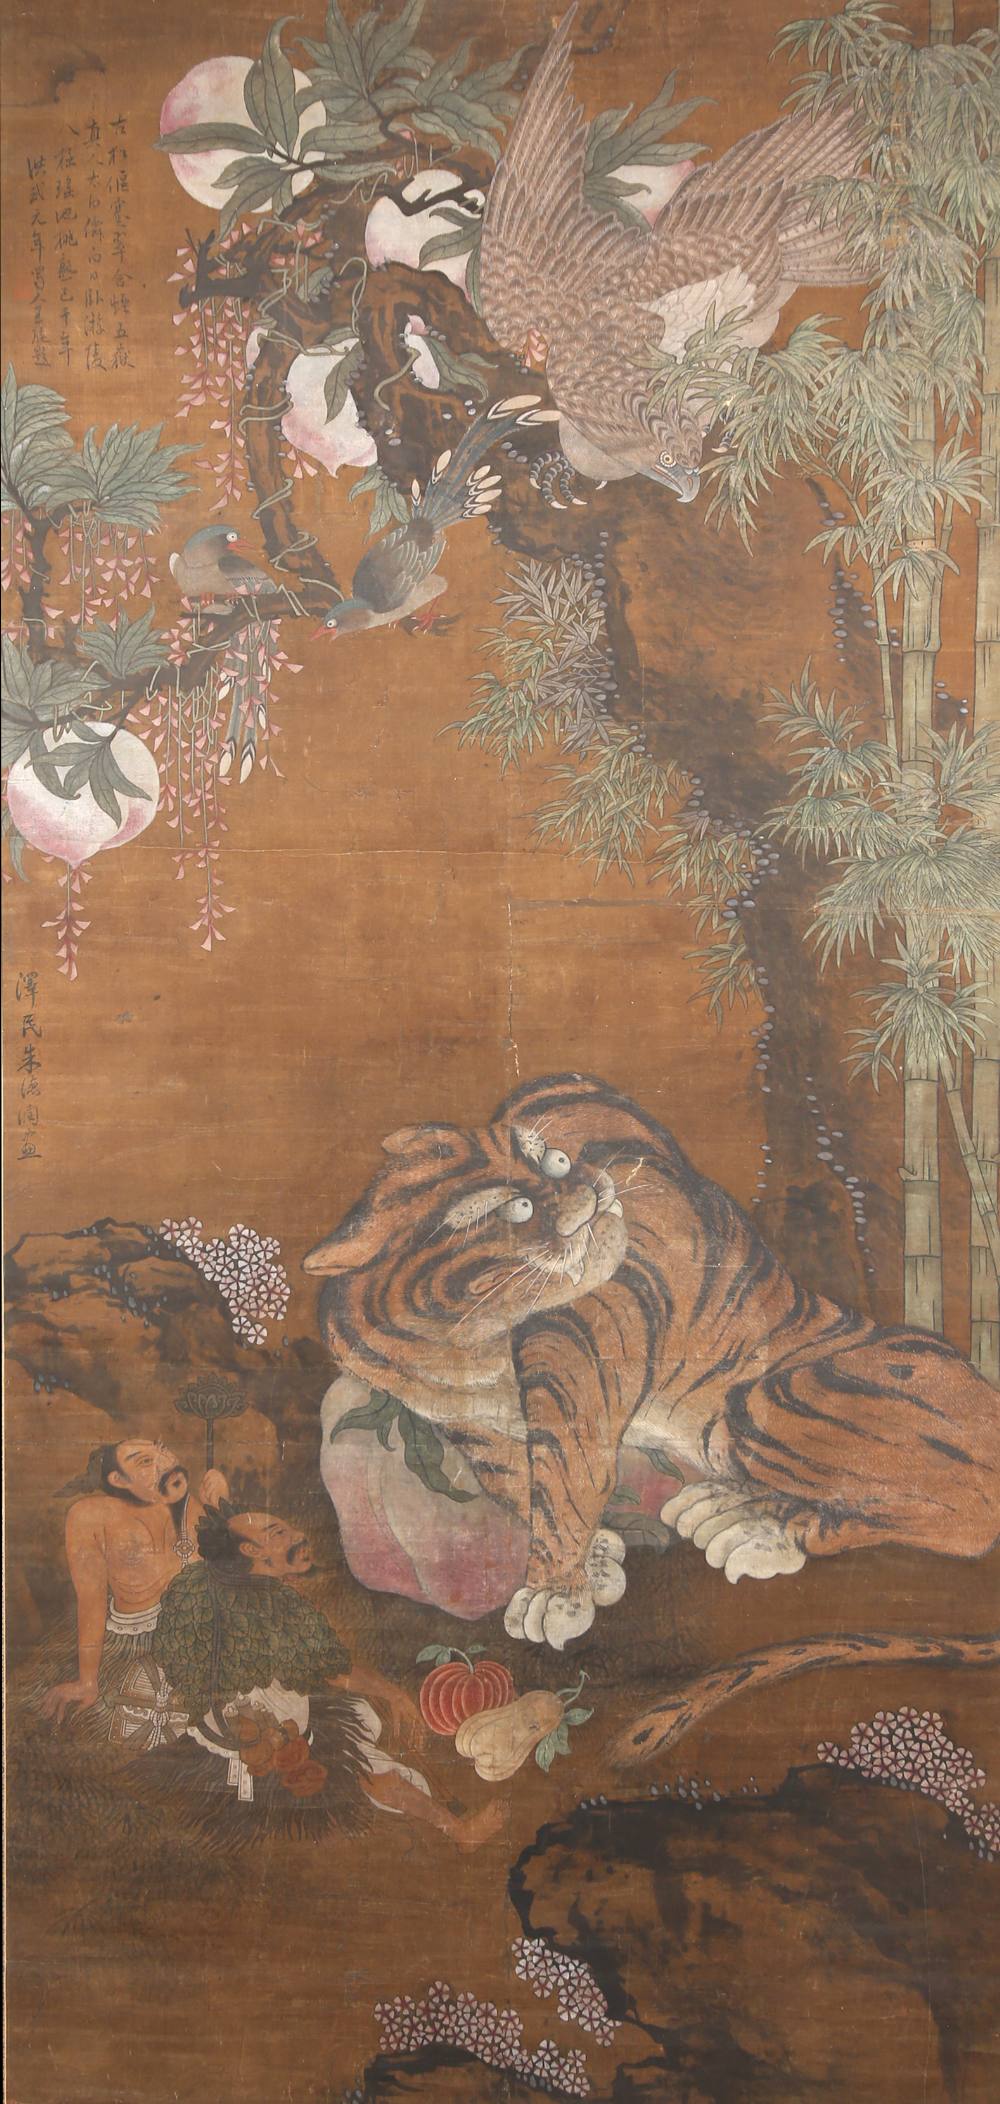 ATTRIBUTED TO ZHU DERUN (MING DYNASTY) EAGLE AND TIGER A Chinese scroll painting, ink and colour